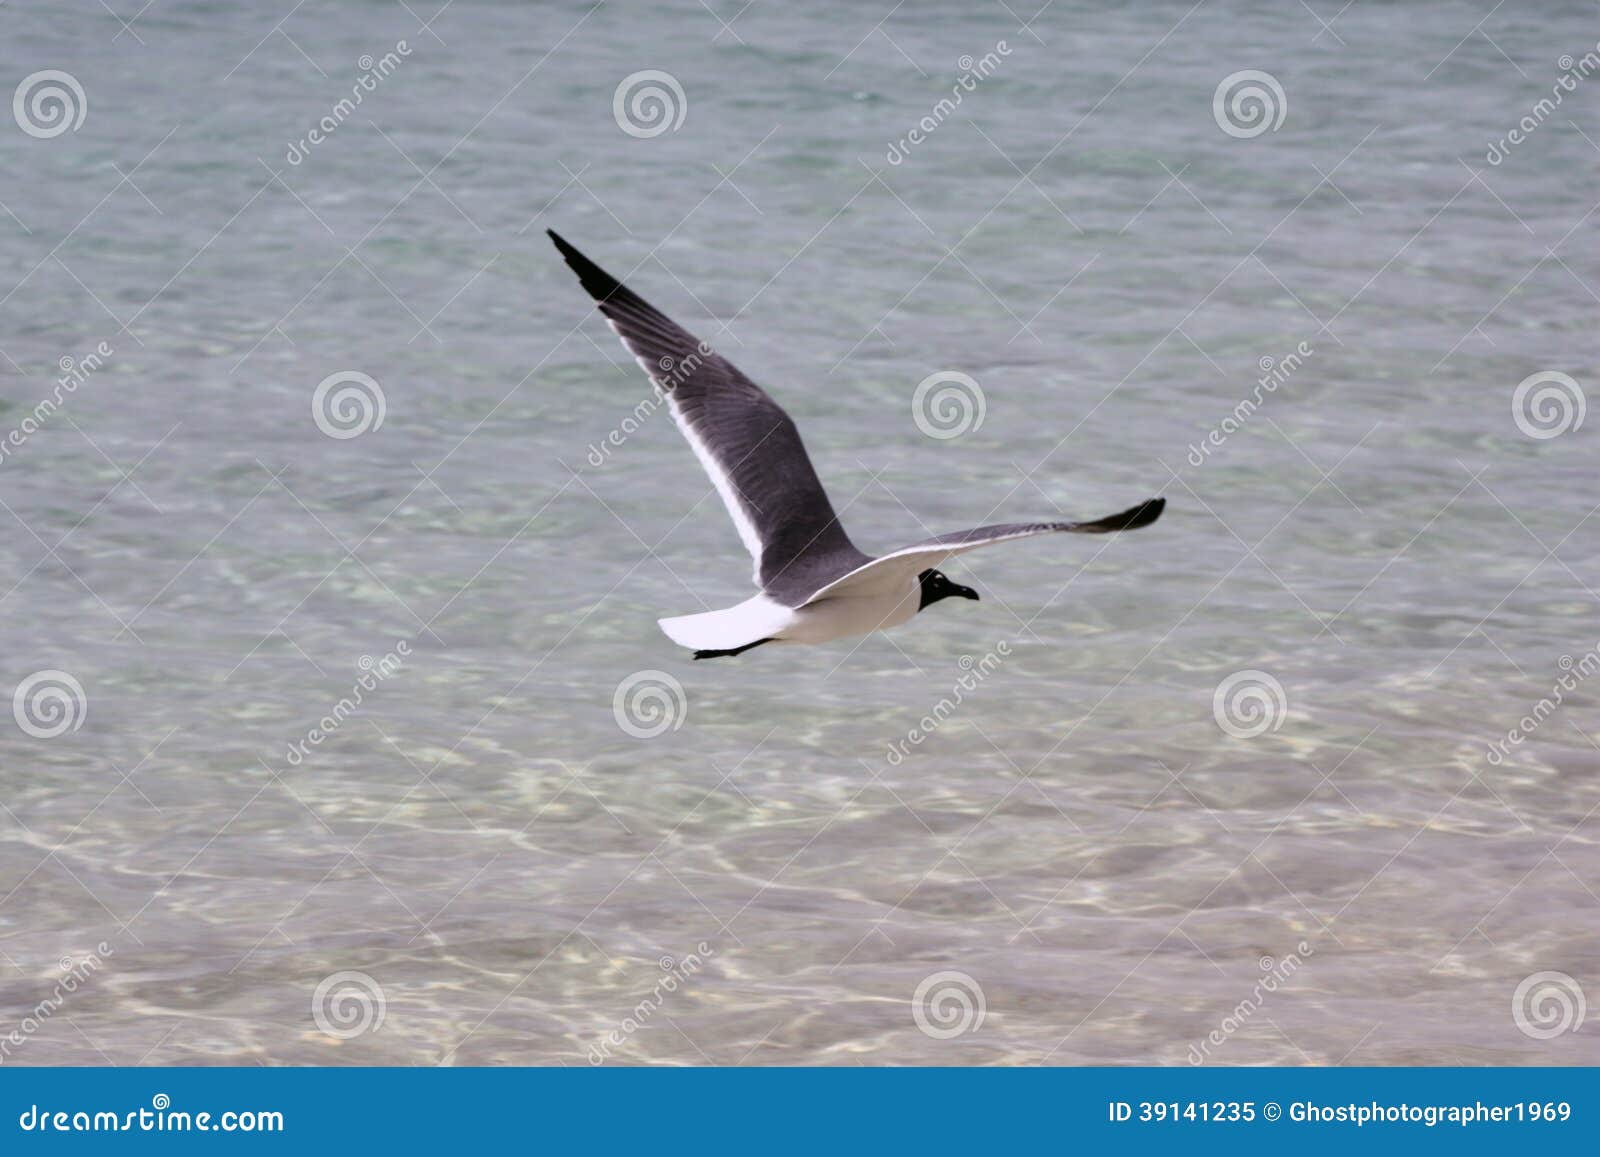 seagull hovering